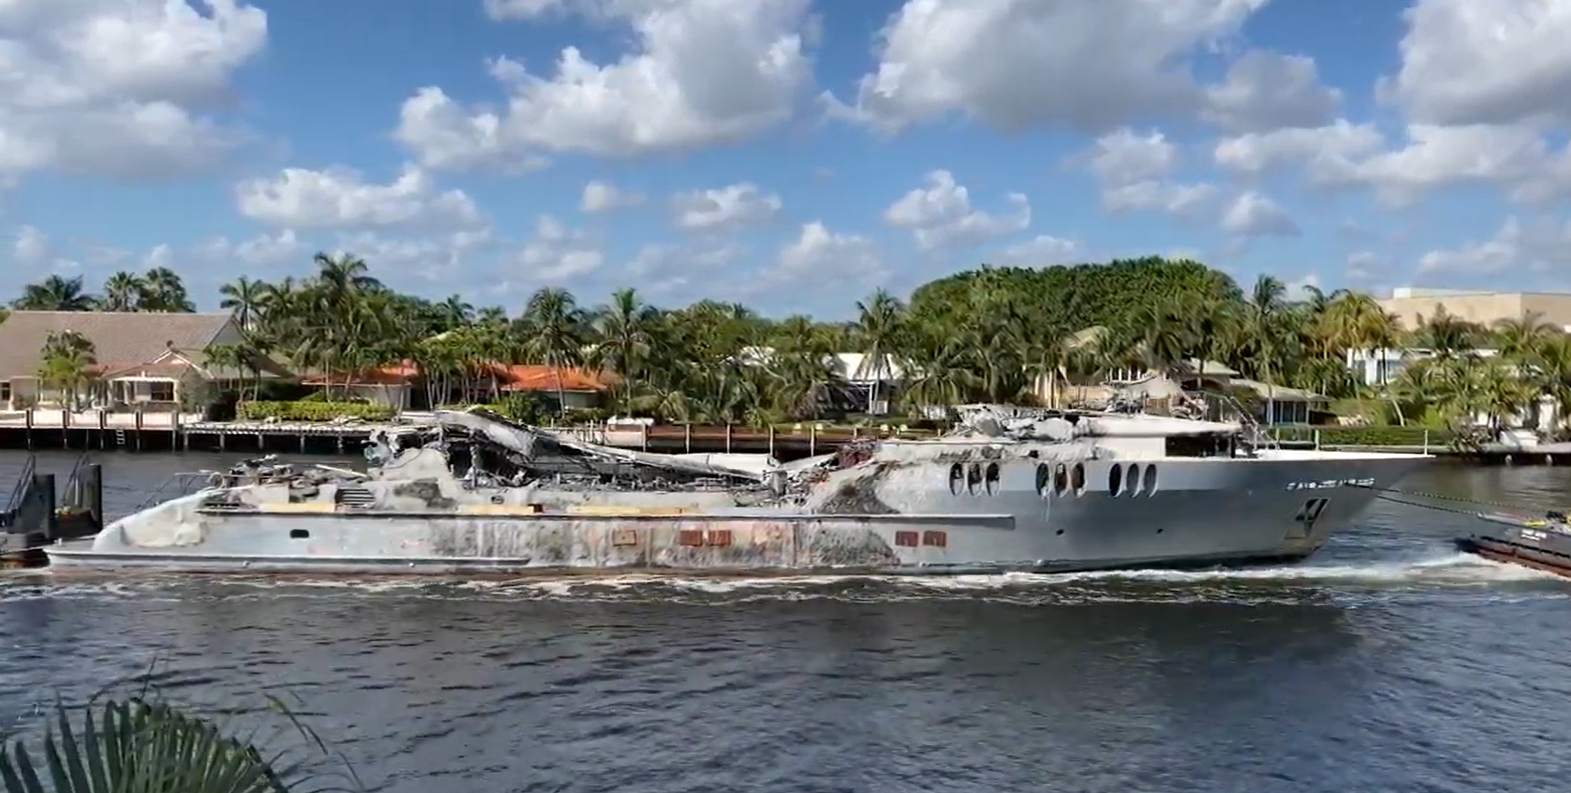 Trinity Yacht LOHENGRIN destroyed in fire